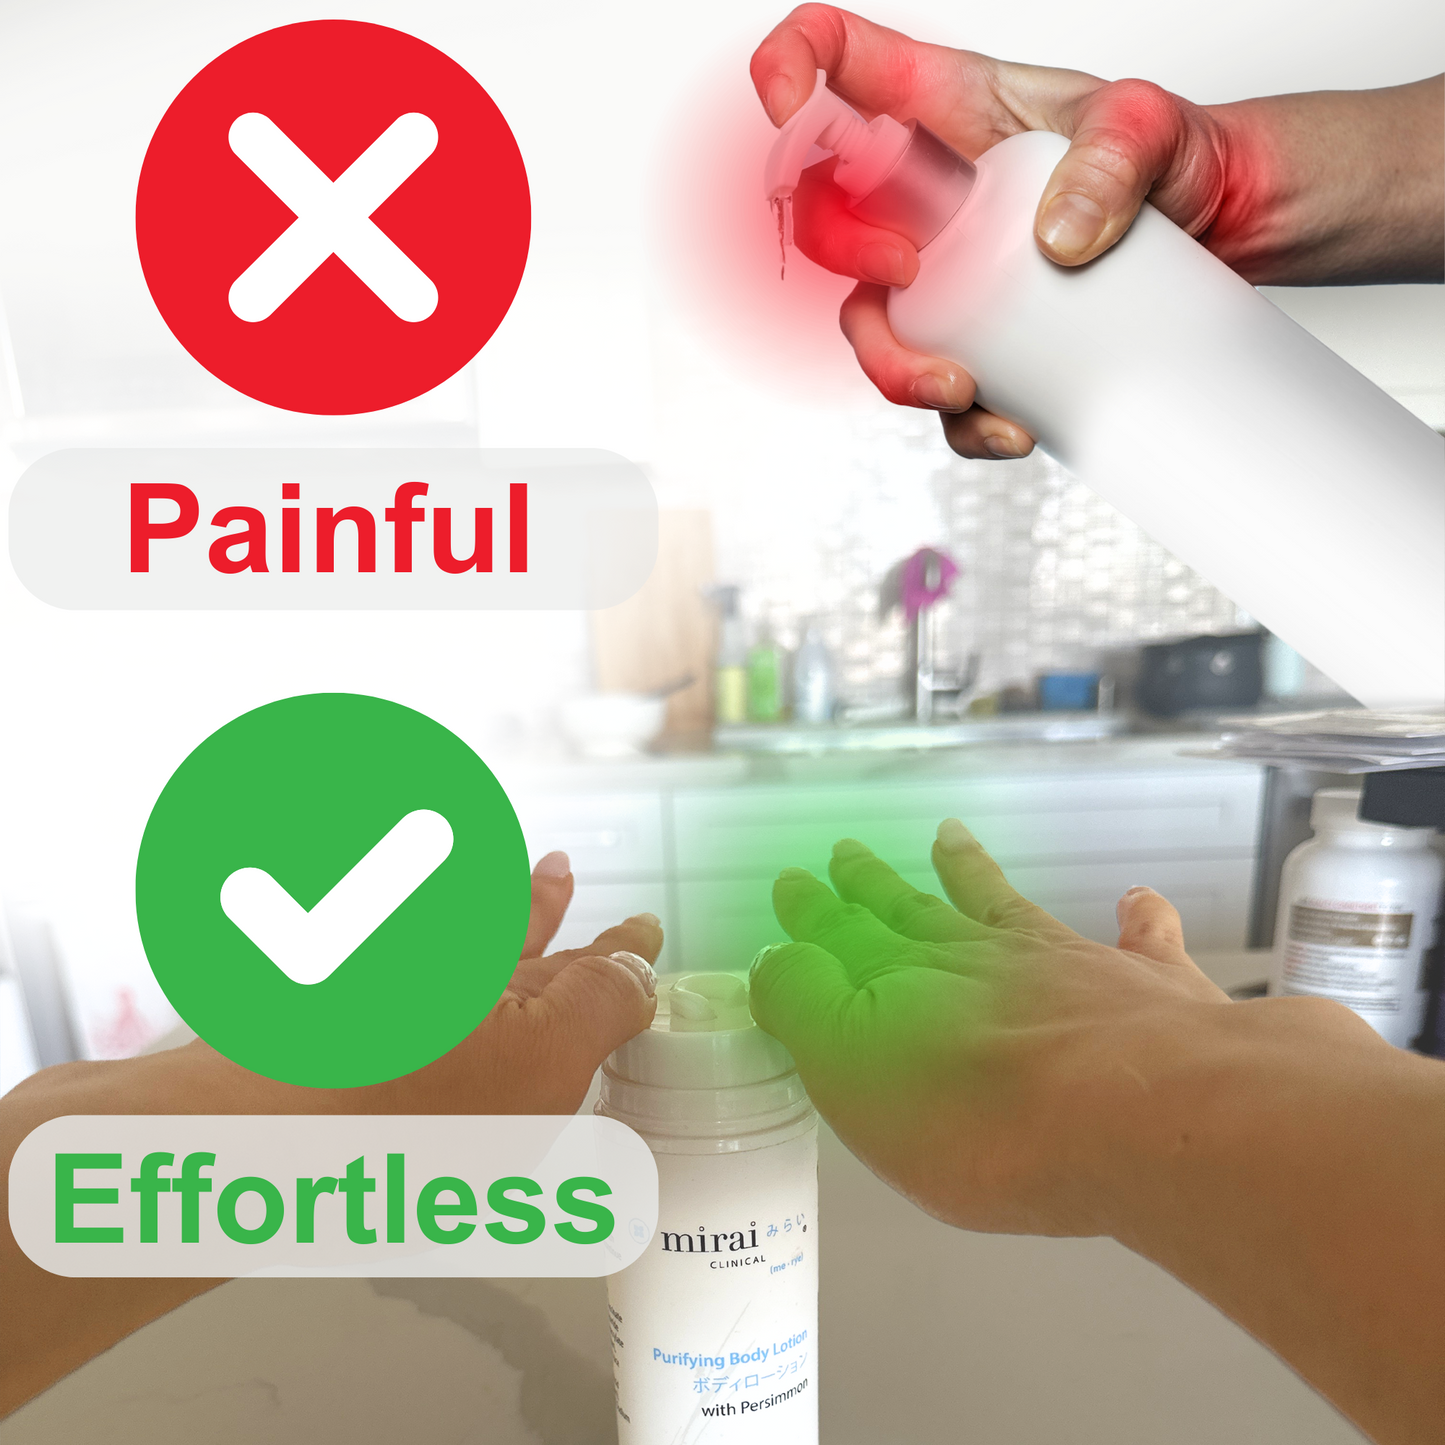 Mirai Clinical Purifying Body Lotion: Effortless Application vs. Painful Struggle. Image shows hands with sore joints using a difficult applicator vs. applying lotion with Mirai's easy-grip pump.